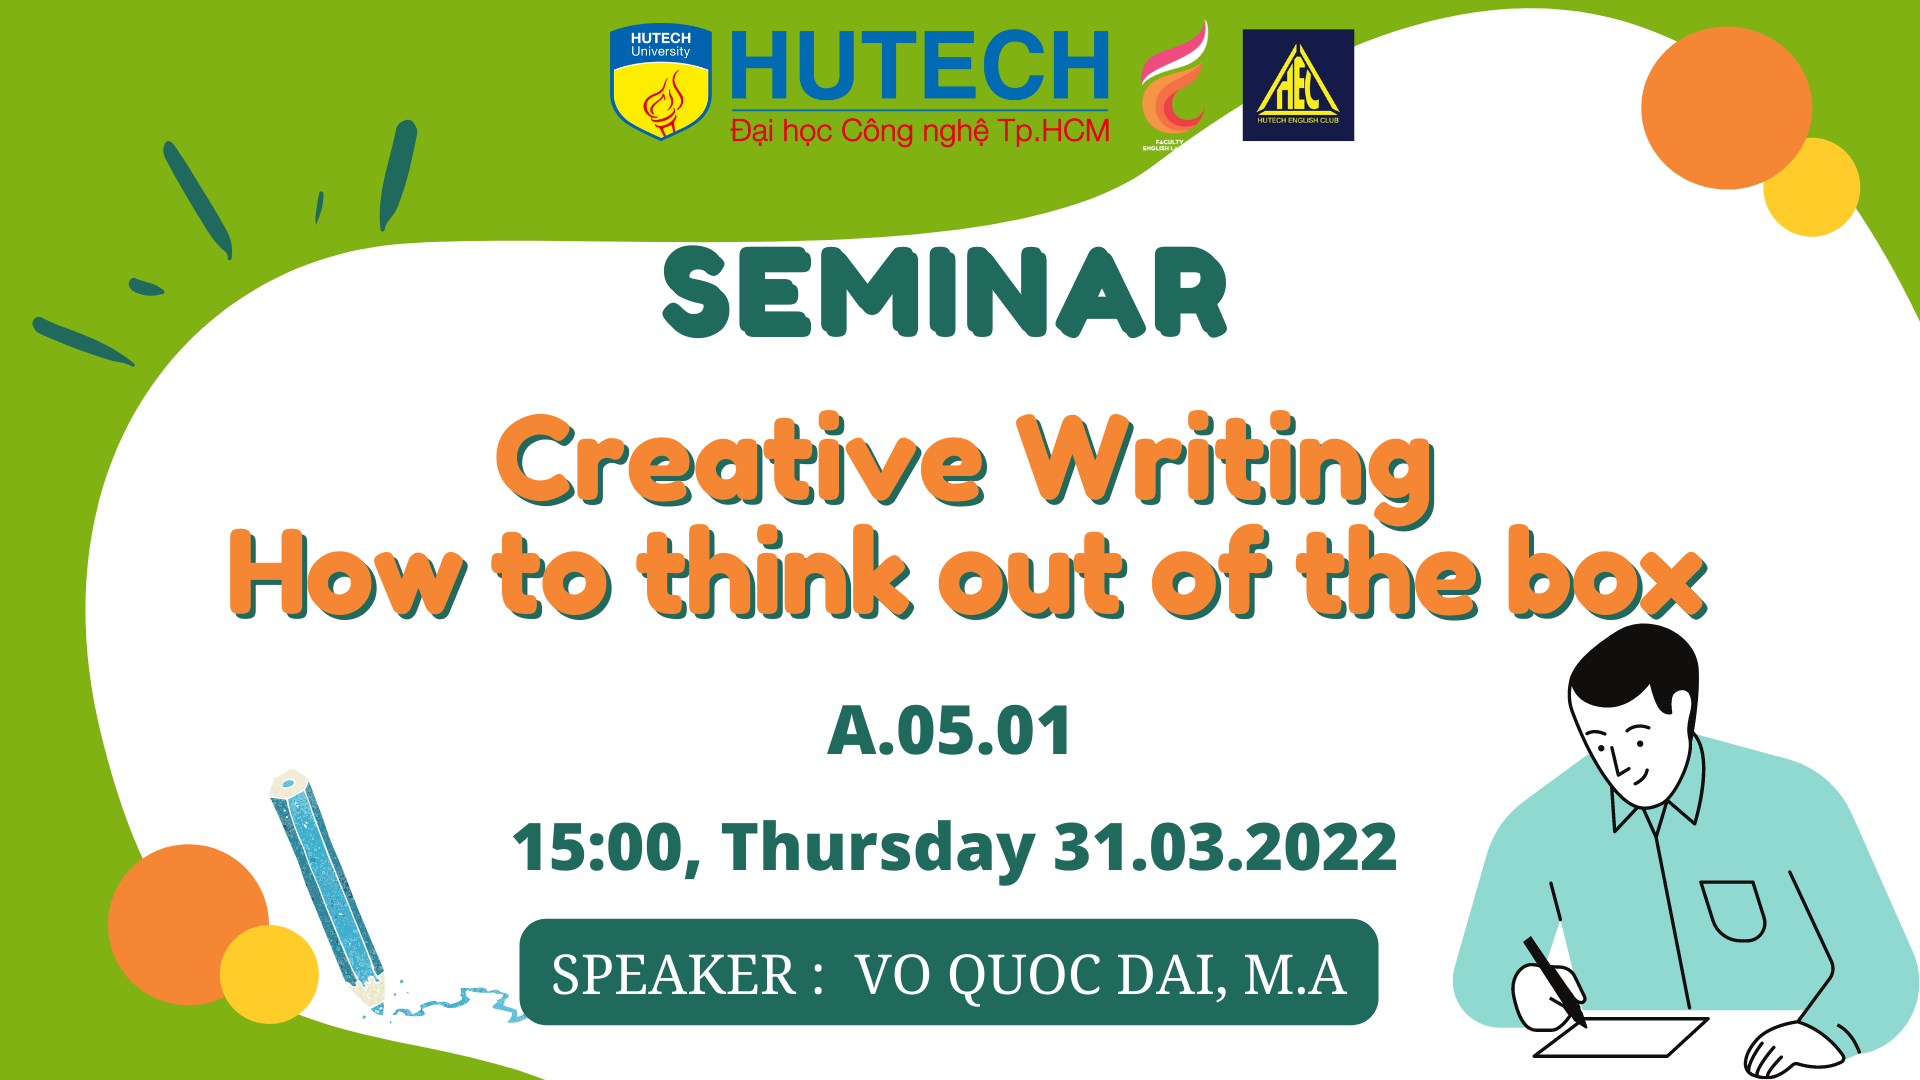 SEMINAR CREATIVE WRITING: HOW TO THINK OUT OF THE BOX 7